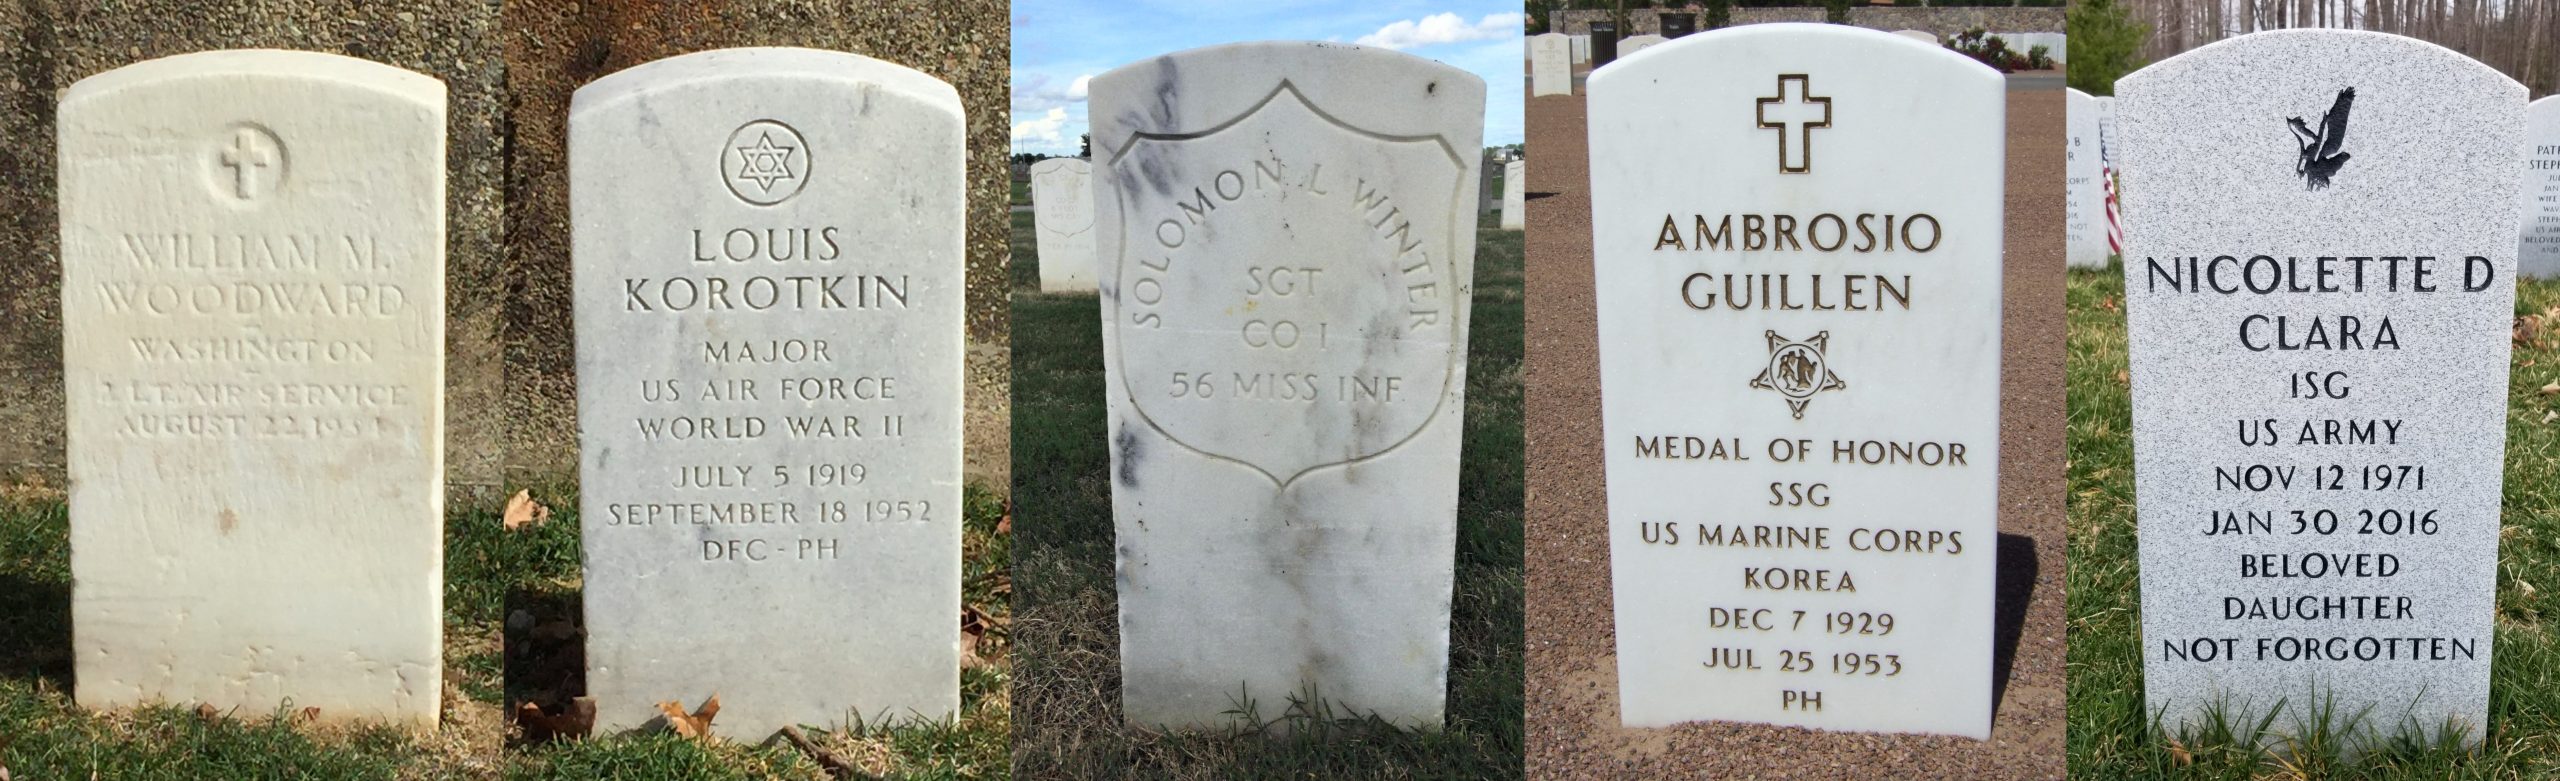 General headstones (left to right): WWI service with Latin cross and WWII service with Star of David, both Cypress Hills National Cemetery, New York; replacement for Civil War service with engraved shield, Baxter Springs Soldiers Lot, Kansas; Medal of Honor Bicentennial design, Fort Bliss National Cemetery, Texas; granite with darkened inscription, Quantico National Cemetery, Virginia. (NCA)